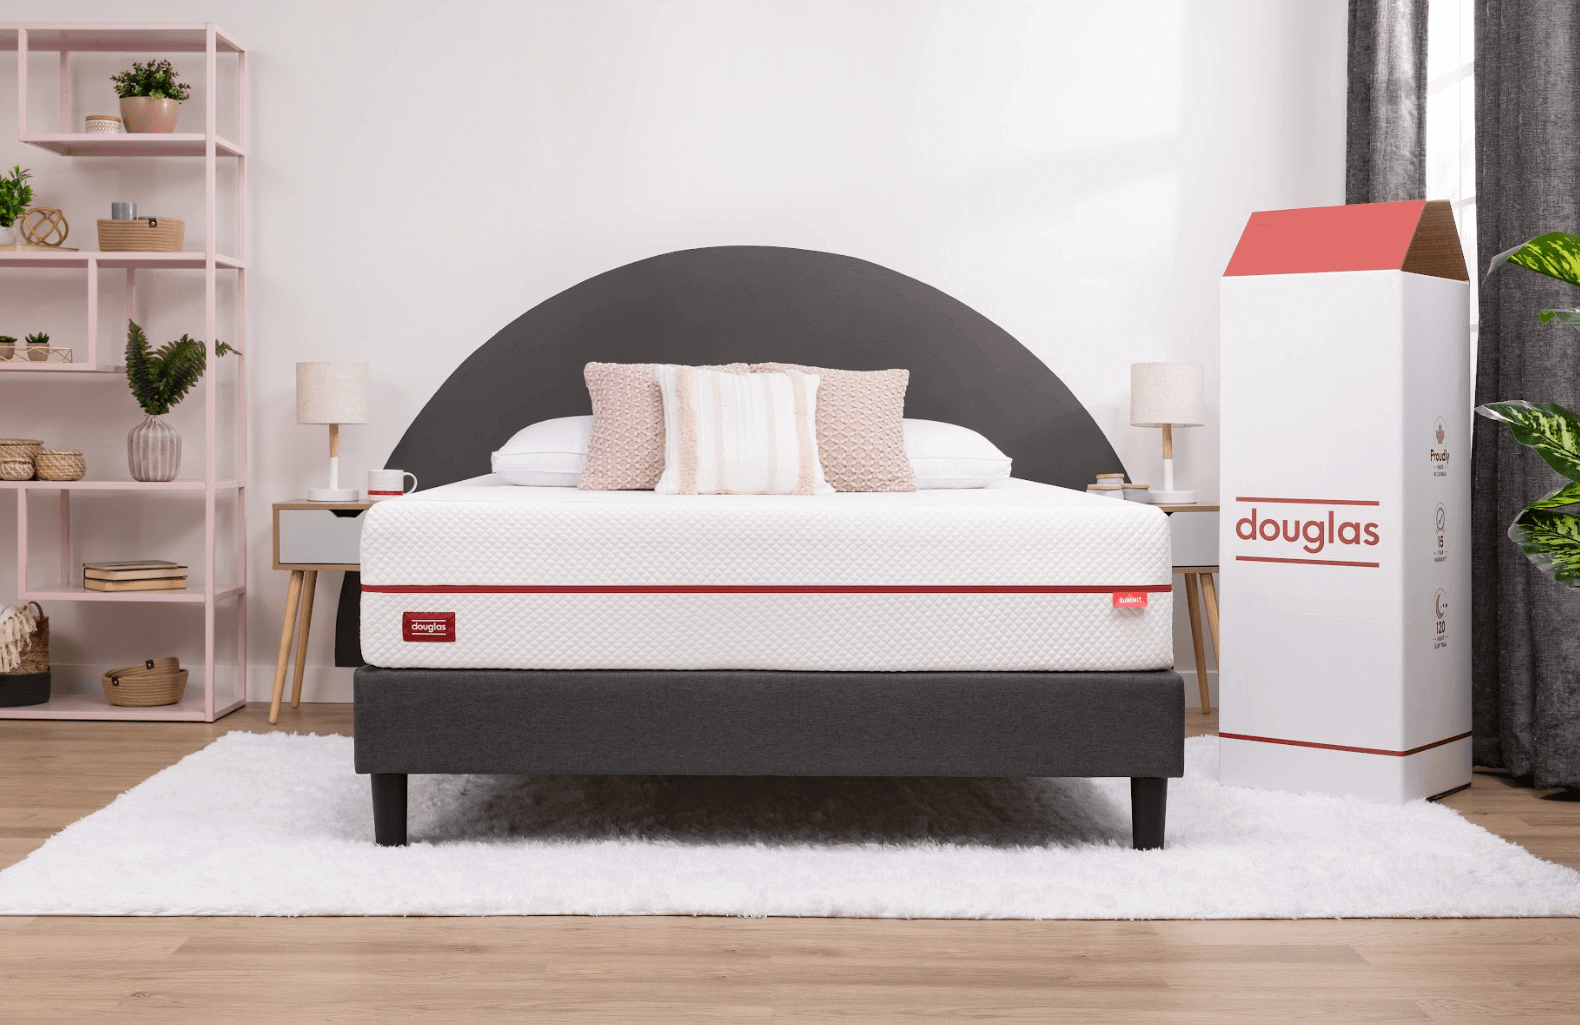 An elegant bedroom with a Douglas Summit mattress and box